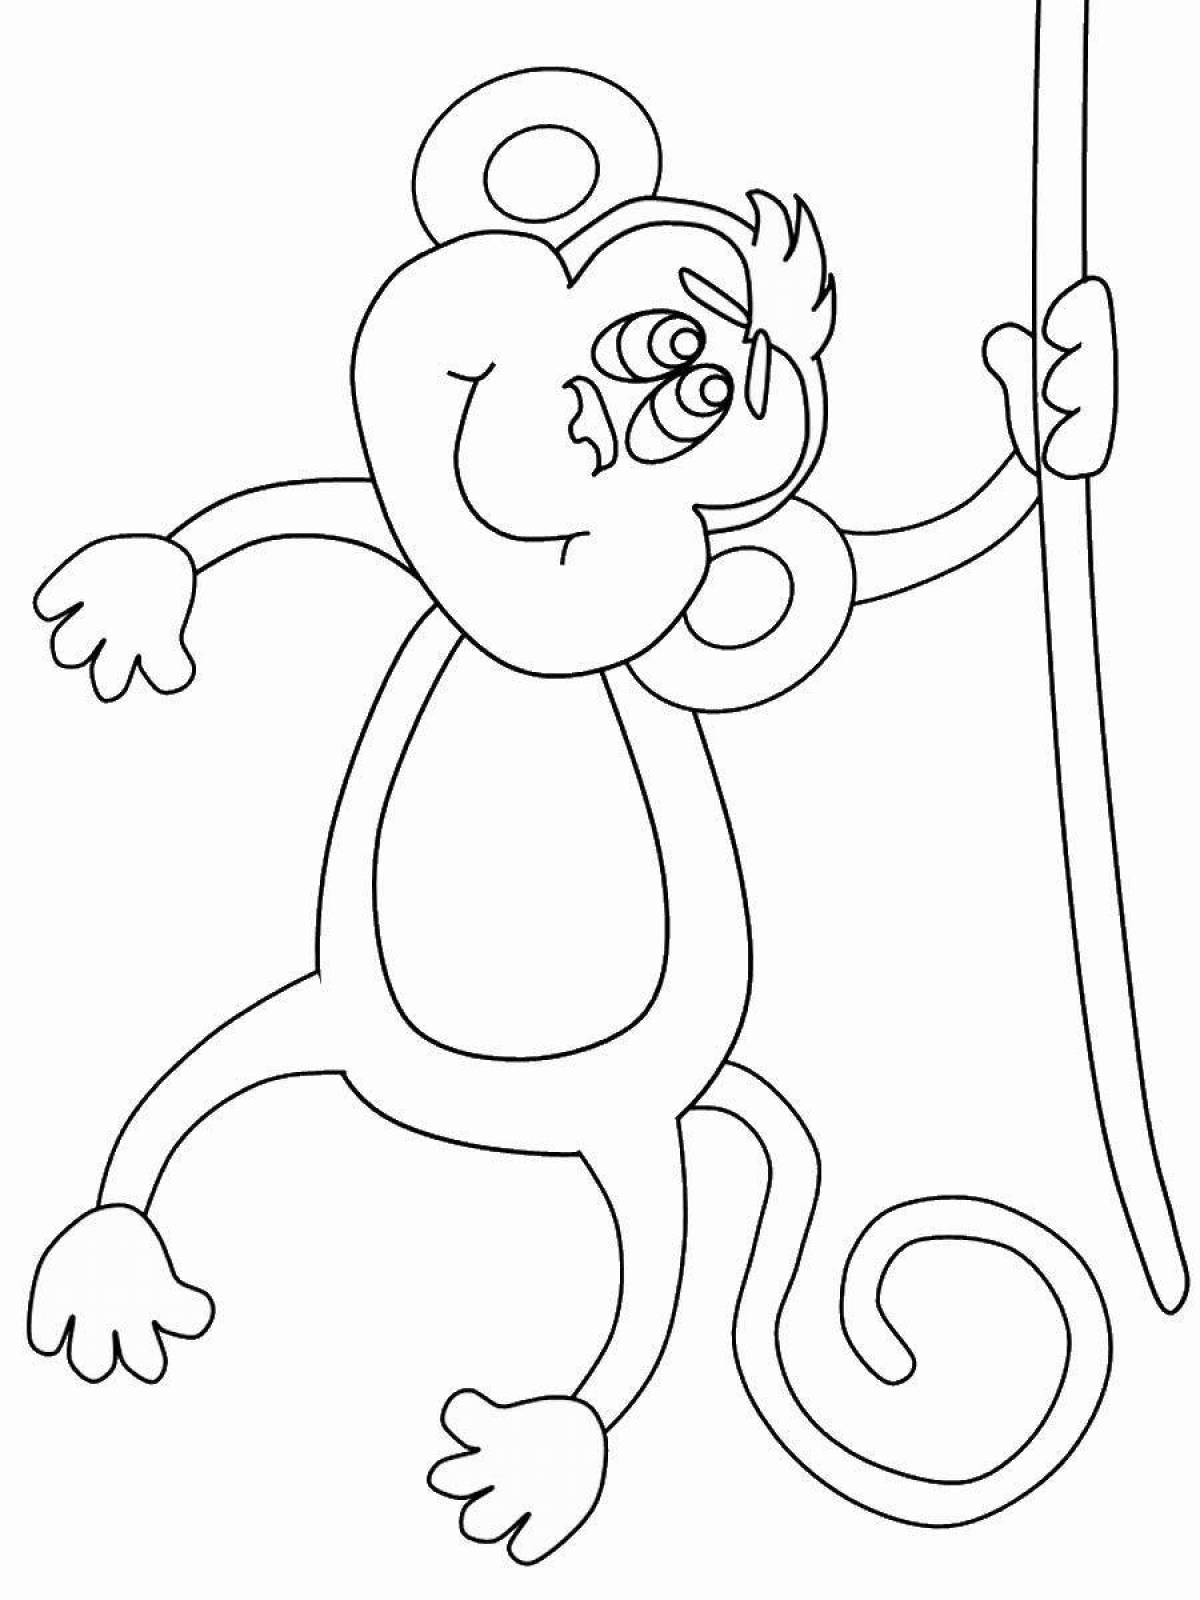 Amazing monkey coloring book for kids